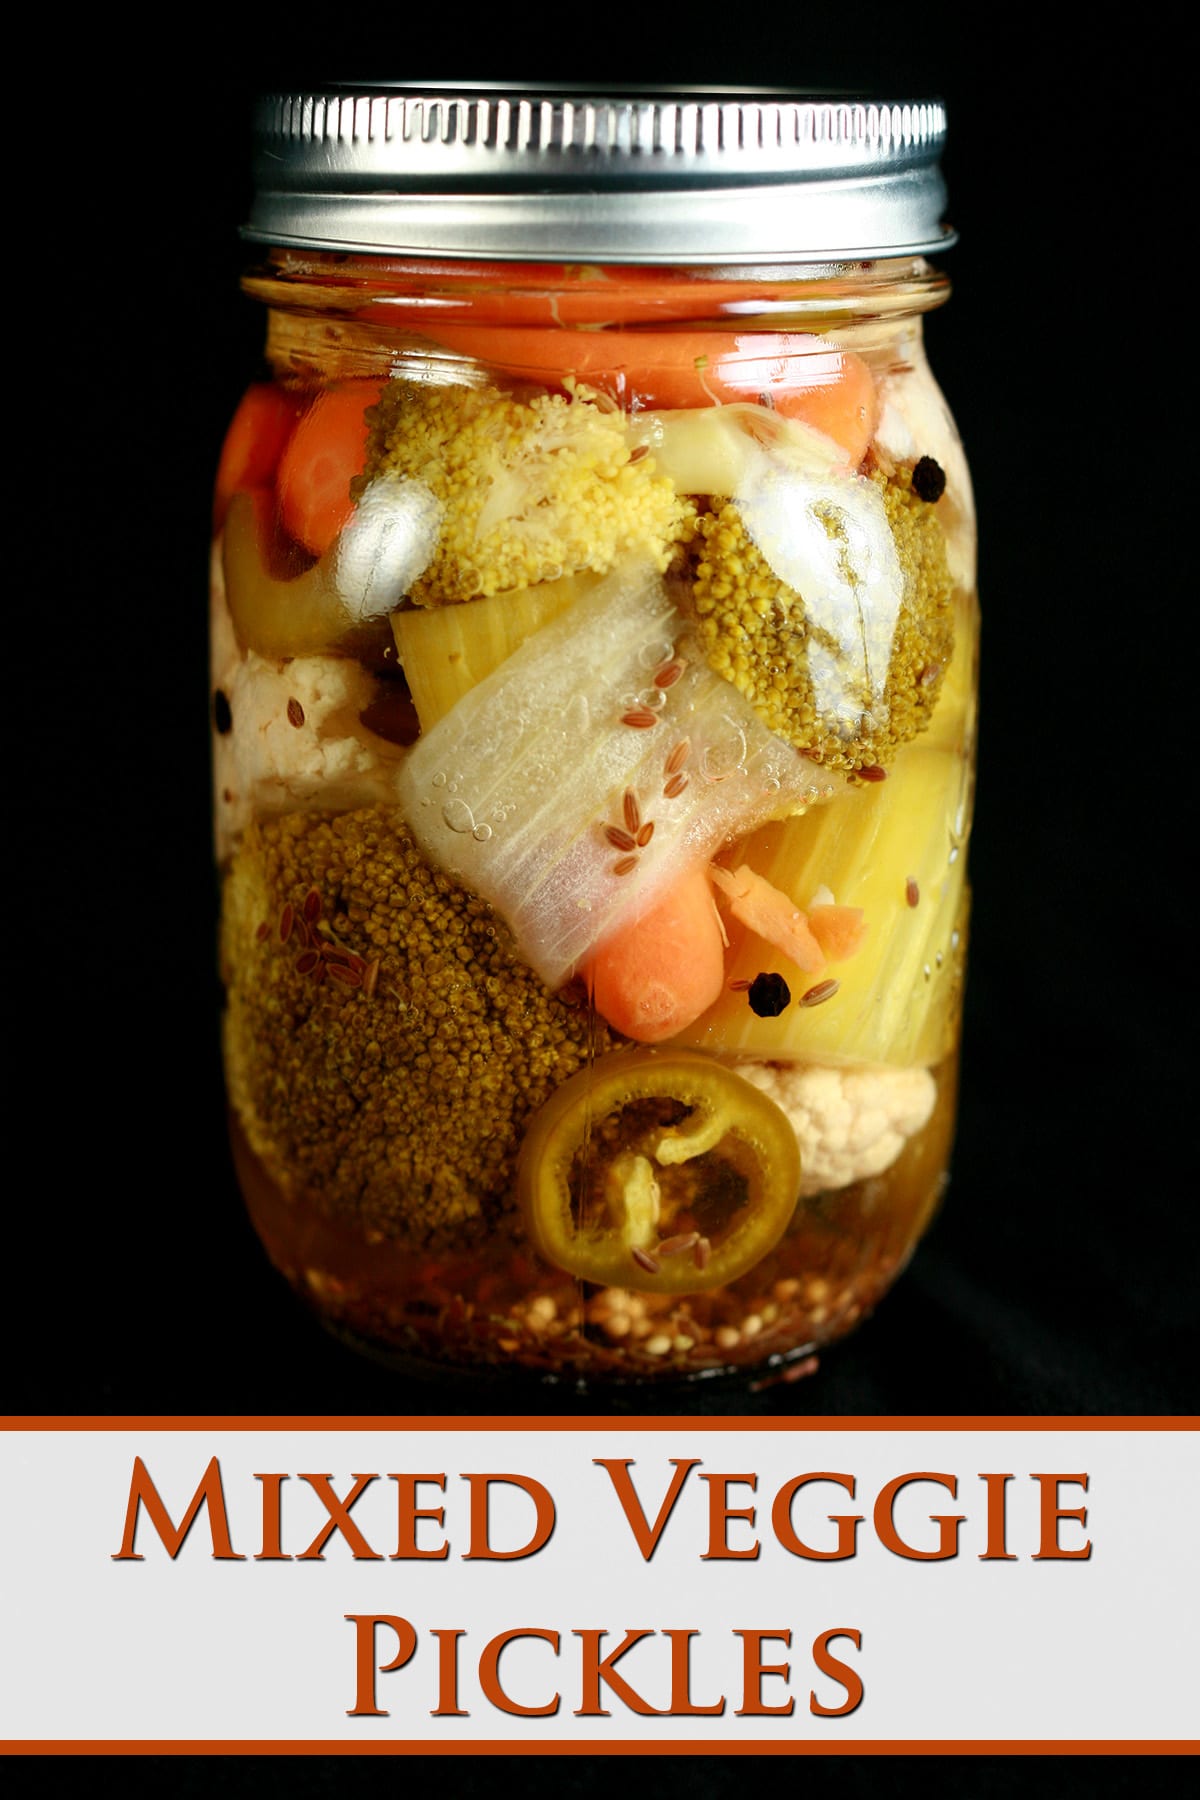 A jar of mixed vegetable pickles on a black background. Baby carrots, broccoli, onion, celery, cauliflower, and jalapeno are all visible.